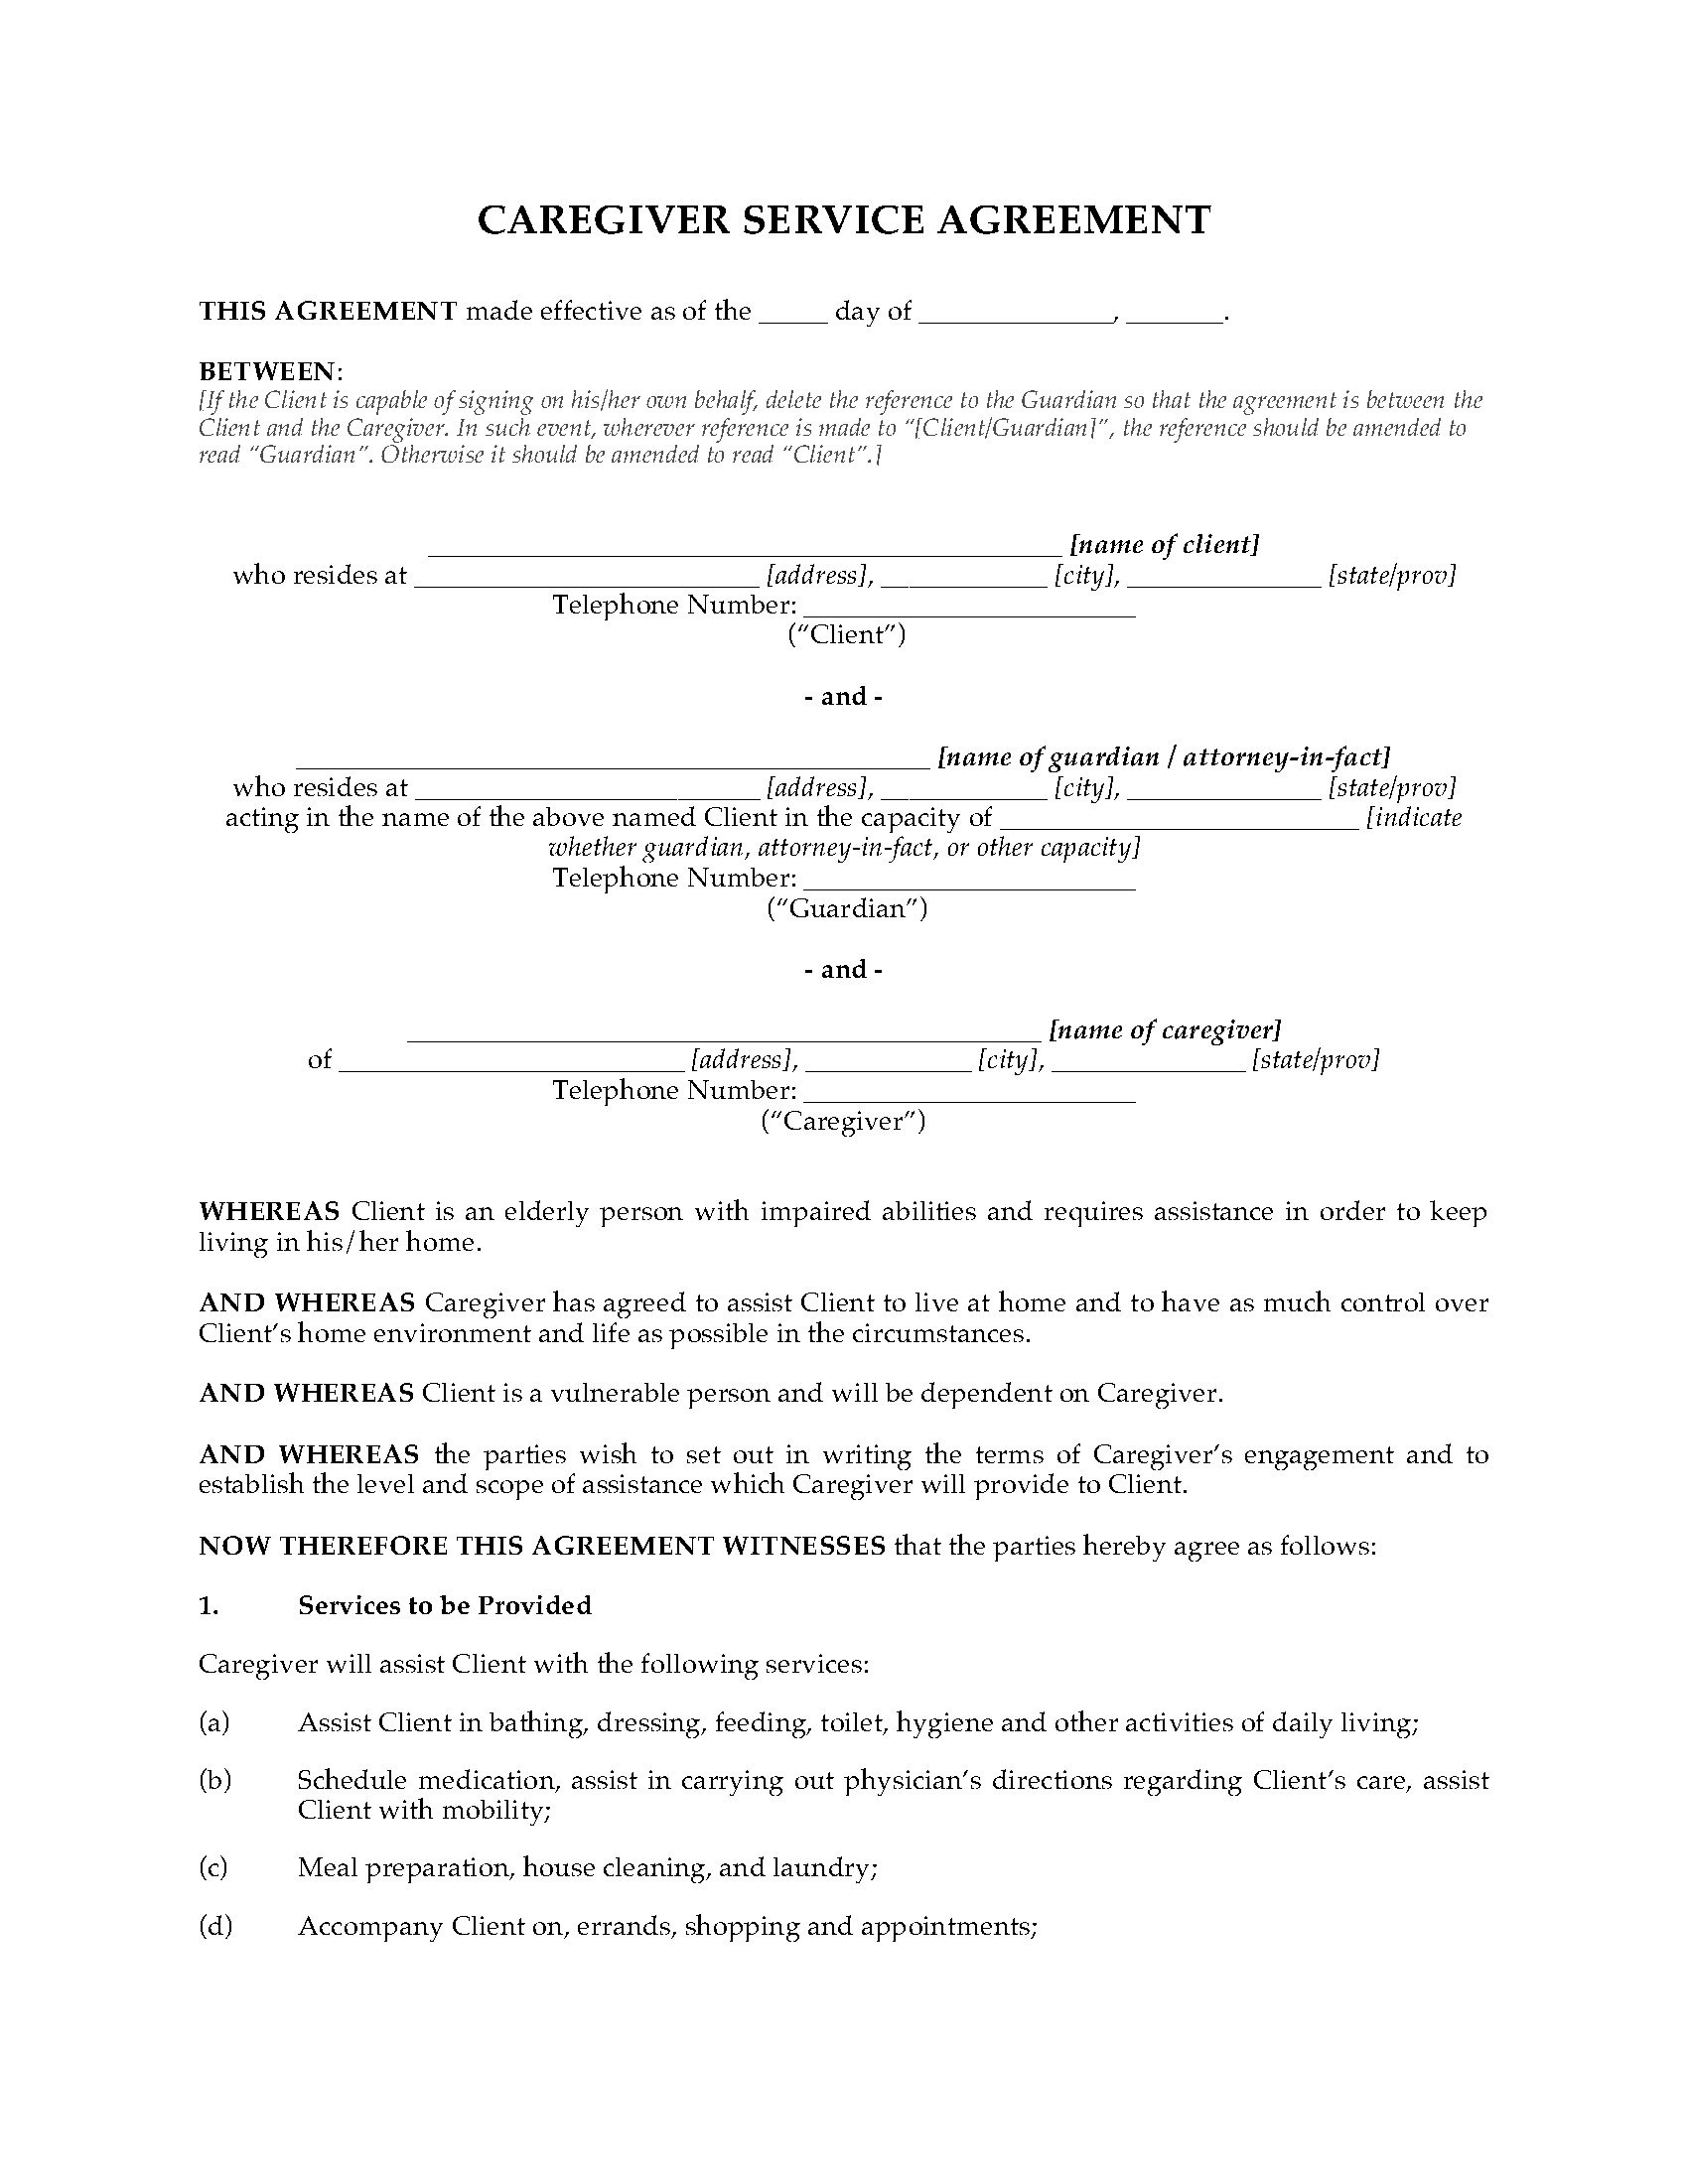 Caregiver Service Agreement Legal Forms And Business Templates Live In